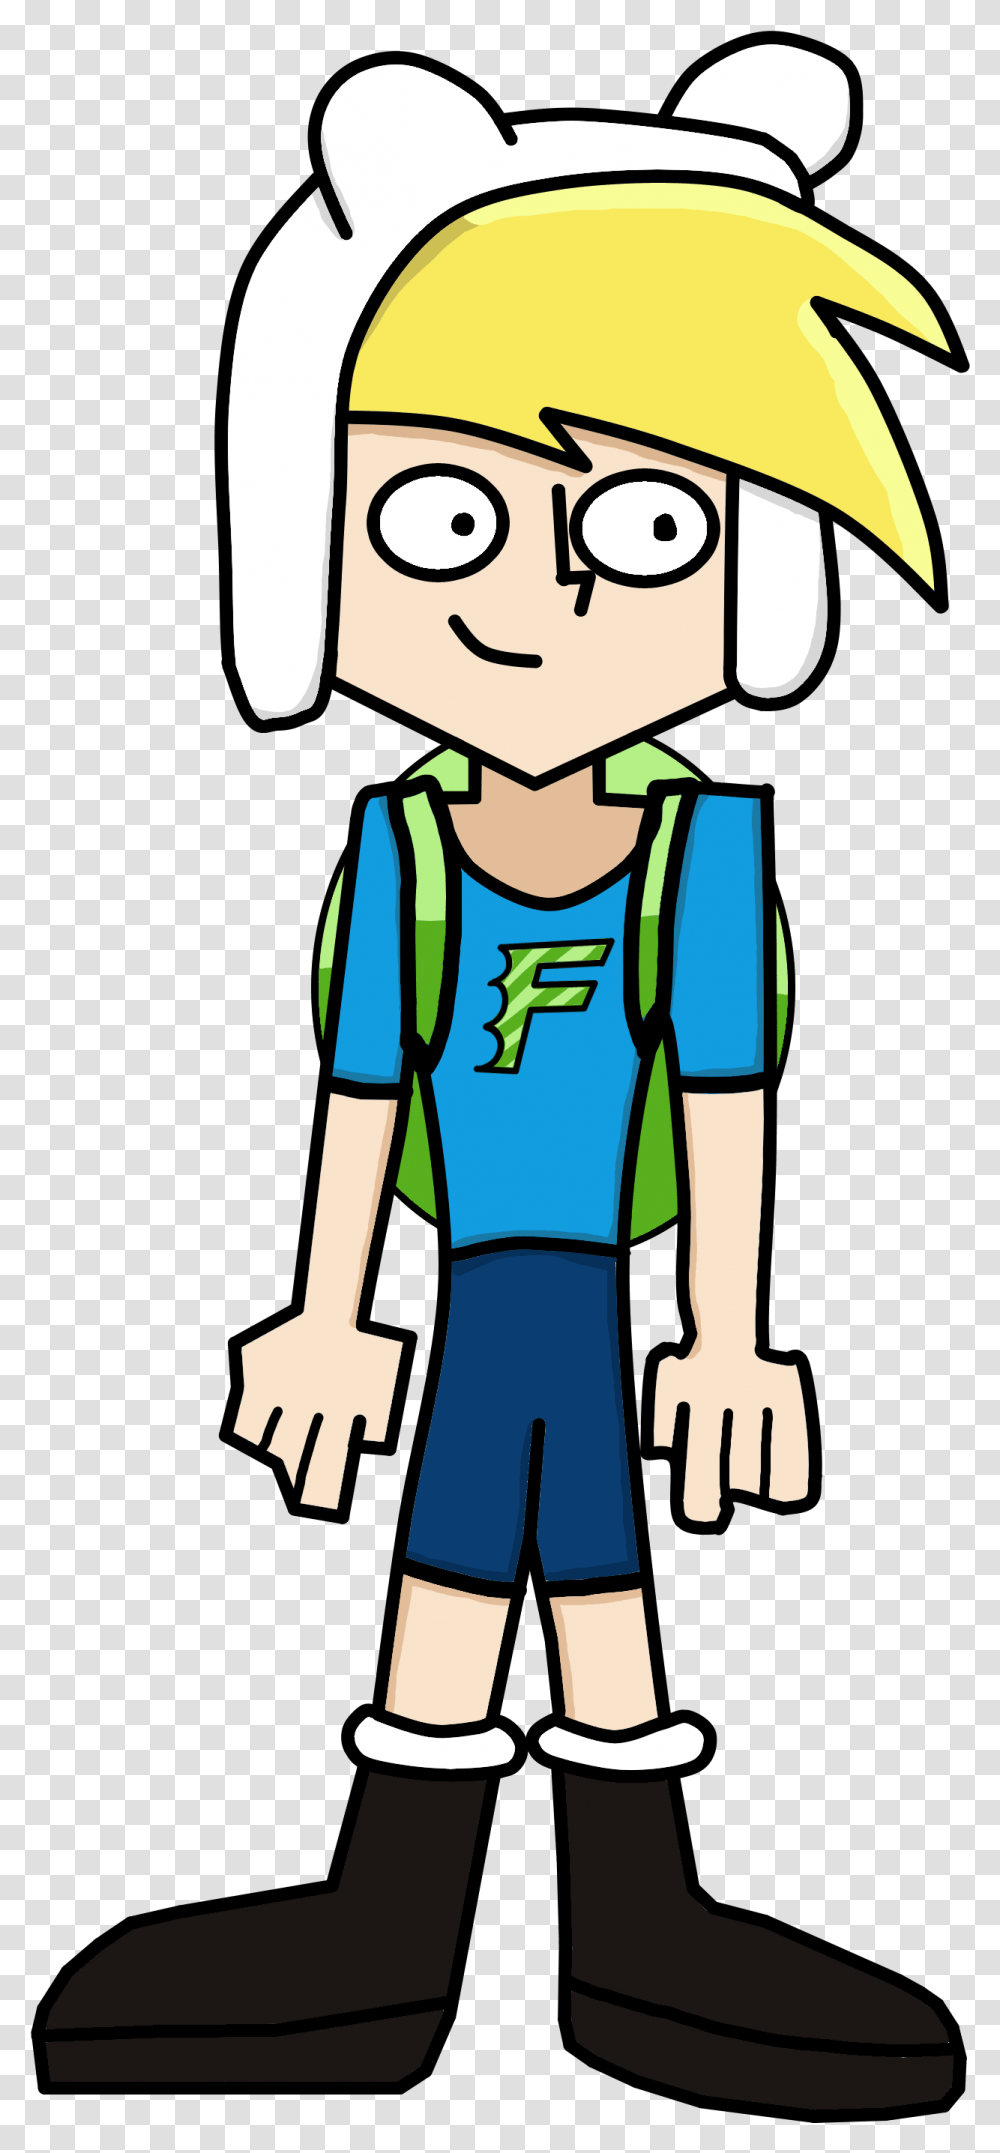 Finn The Human In The Style Of Danny Phantom Cartoon, Person, People, Costume, Elf Transparent Png